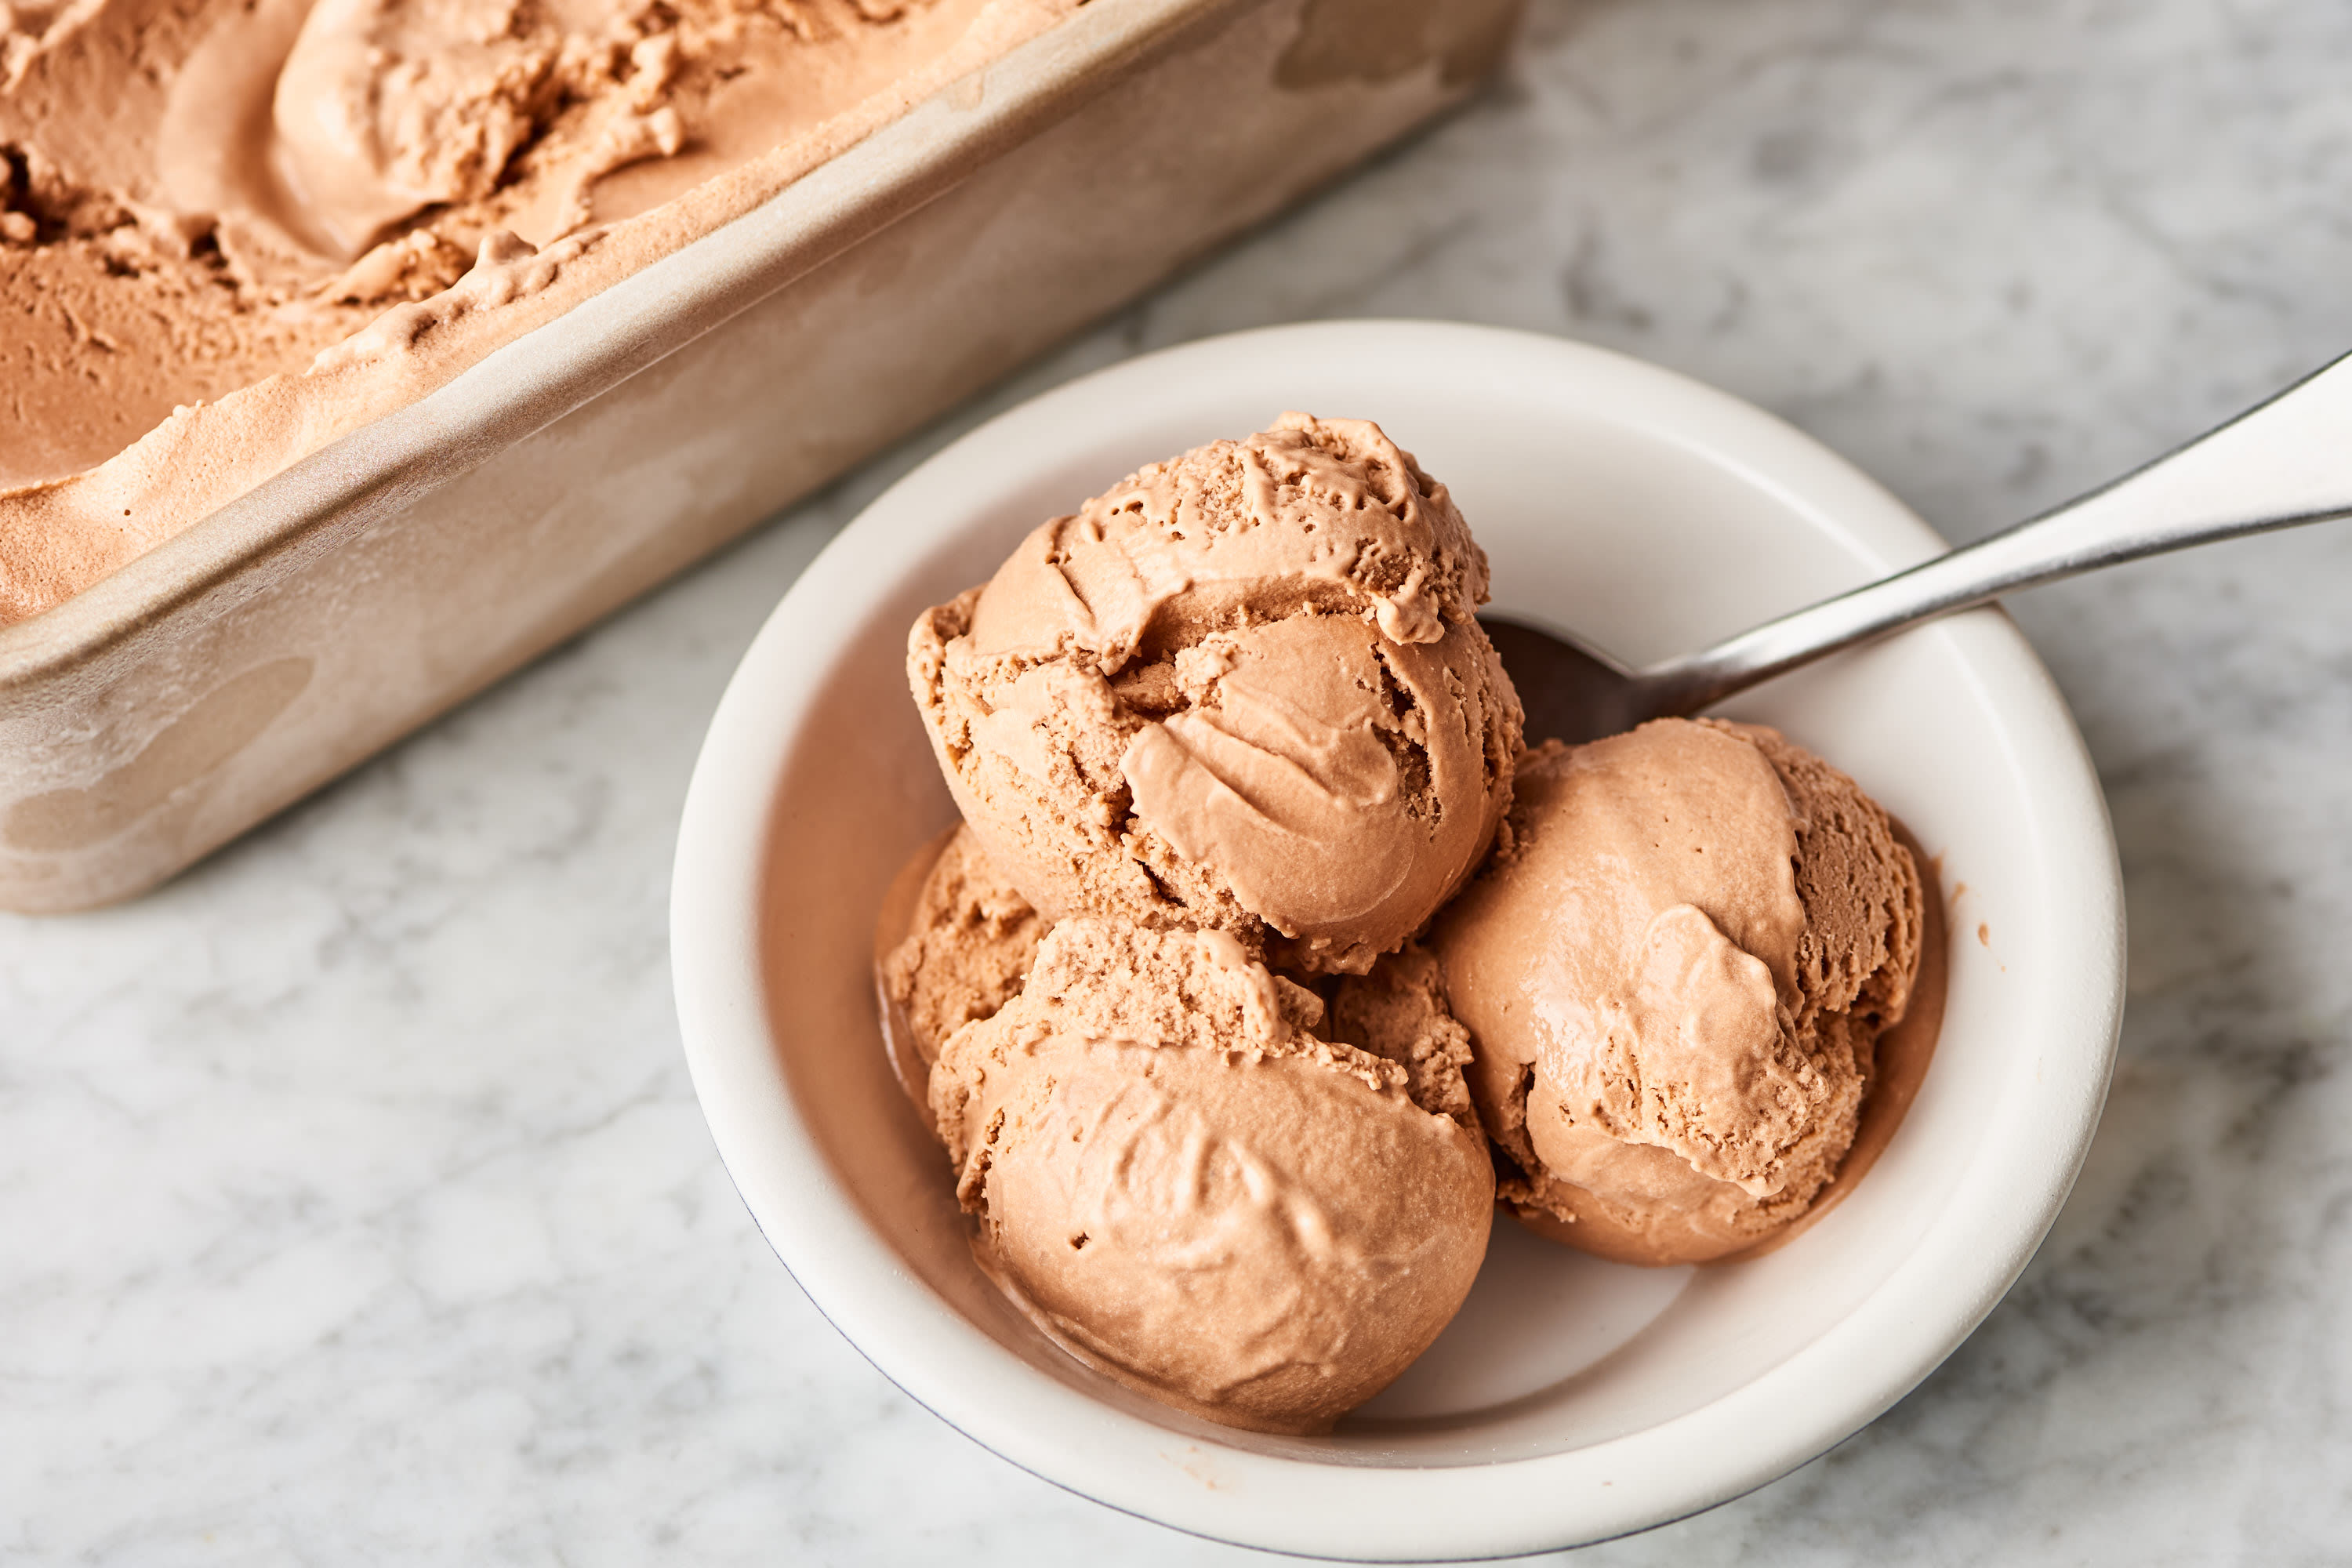 https://cdn.apartmenttherapy.info/image/upload/v1565639473/k/Photo/Tips/2019-08-this-%241-ingredient-is-the-secret-so-fast-and-easy-homemade-ice-cream/This-Ingredient-is-the-Secret-to-Fast-and-Easy-Homemade-Ice-Cream_033.jpg